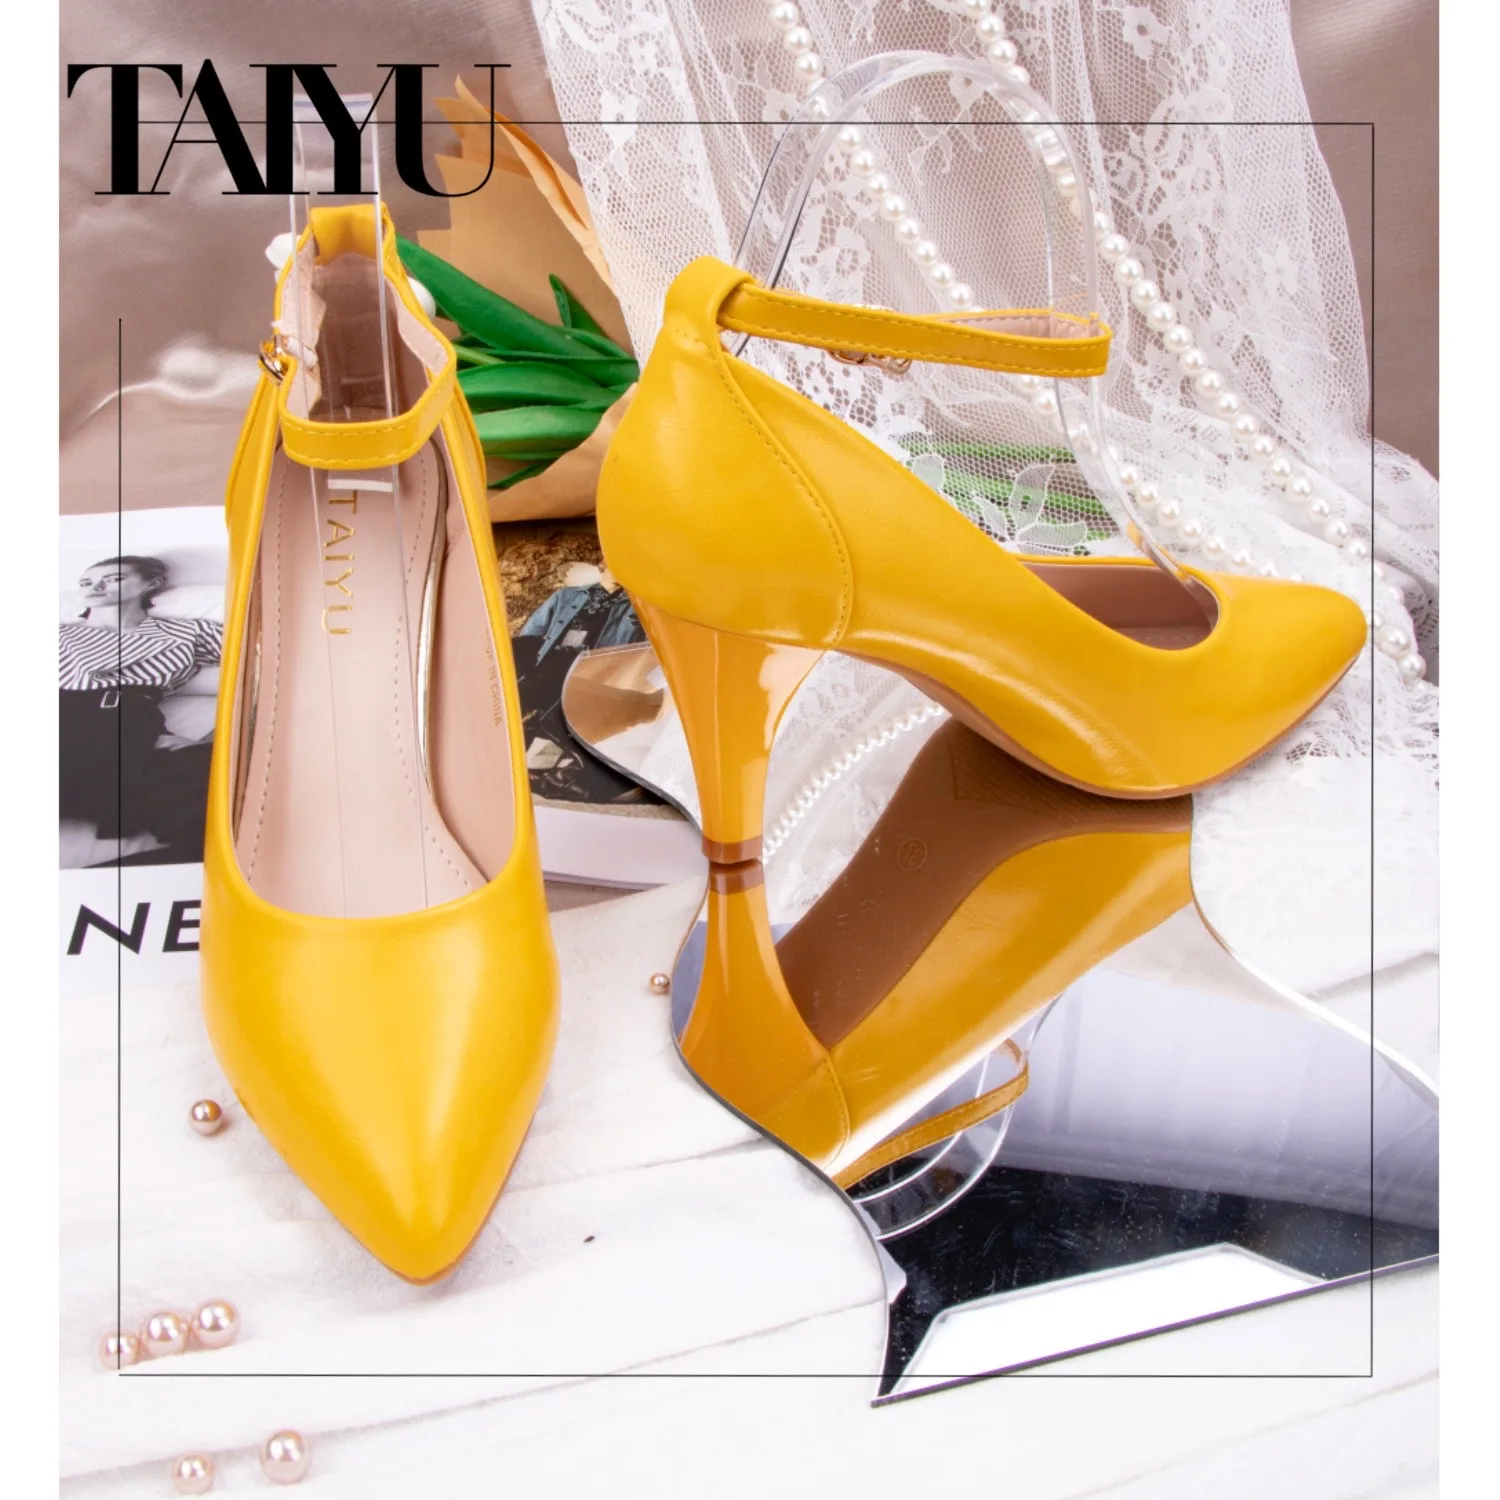 John Fluevog Shoes - If you haven't heard, Prepare yourself – the yellow  GENERATORs are now on #sale! Shop these electrifying platform heels and  other newly added styles online and in stores